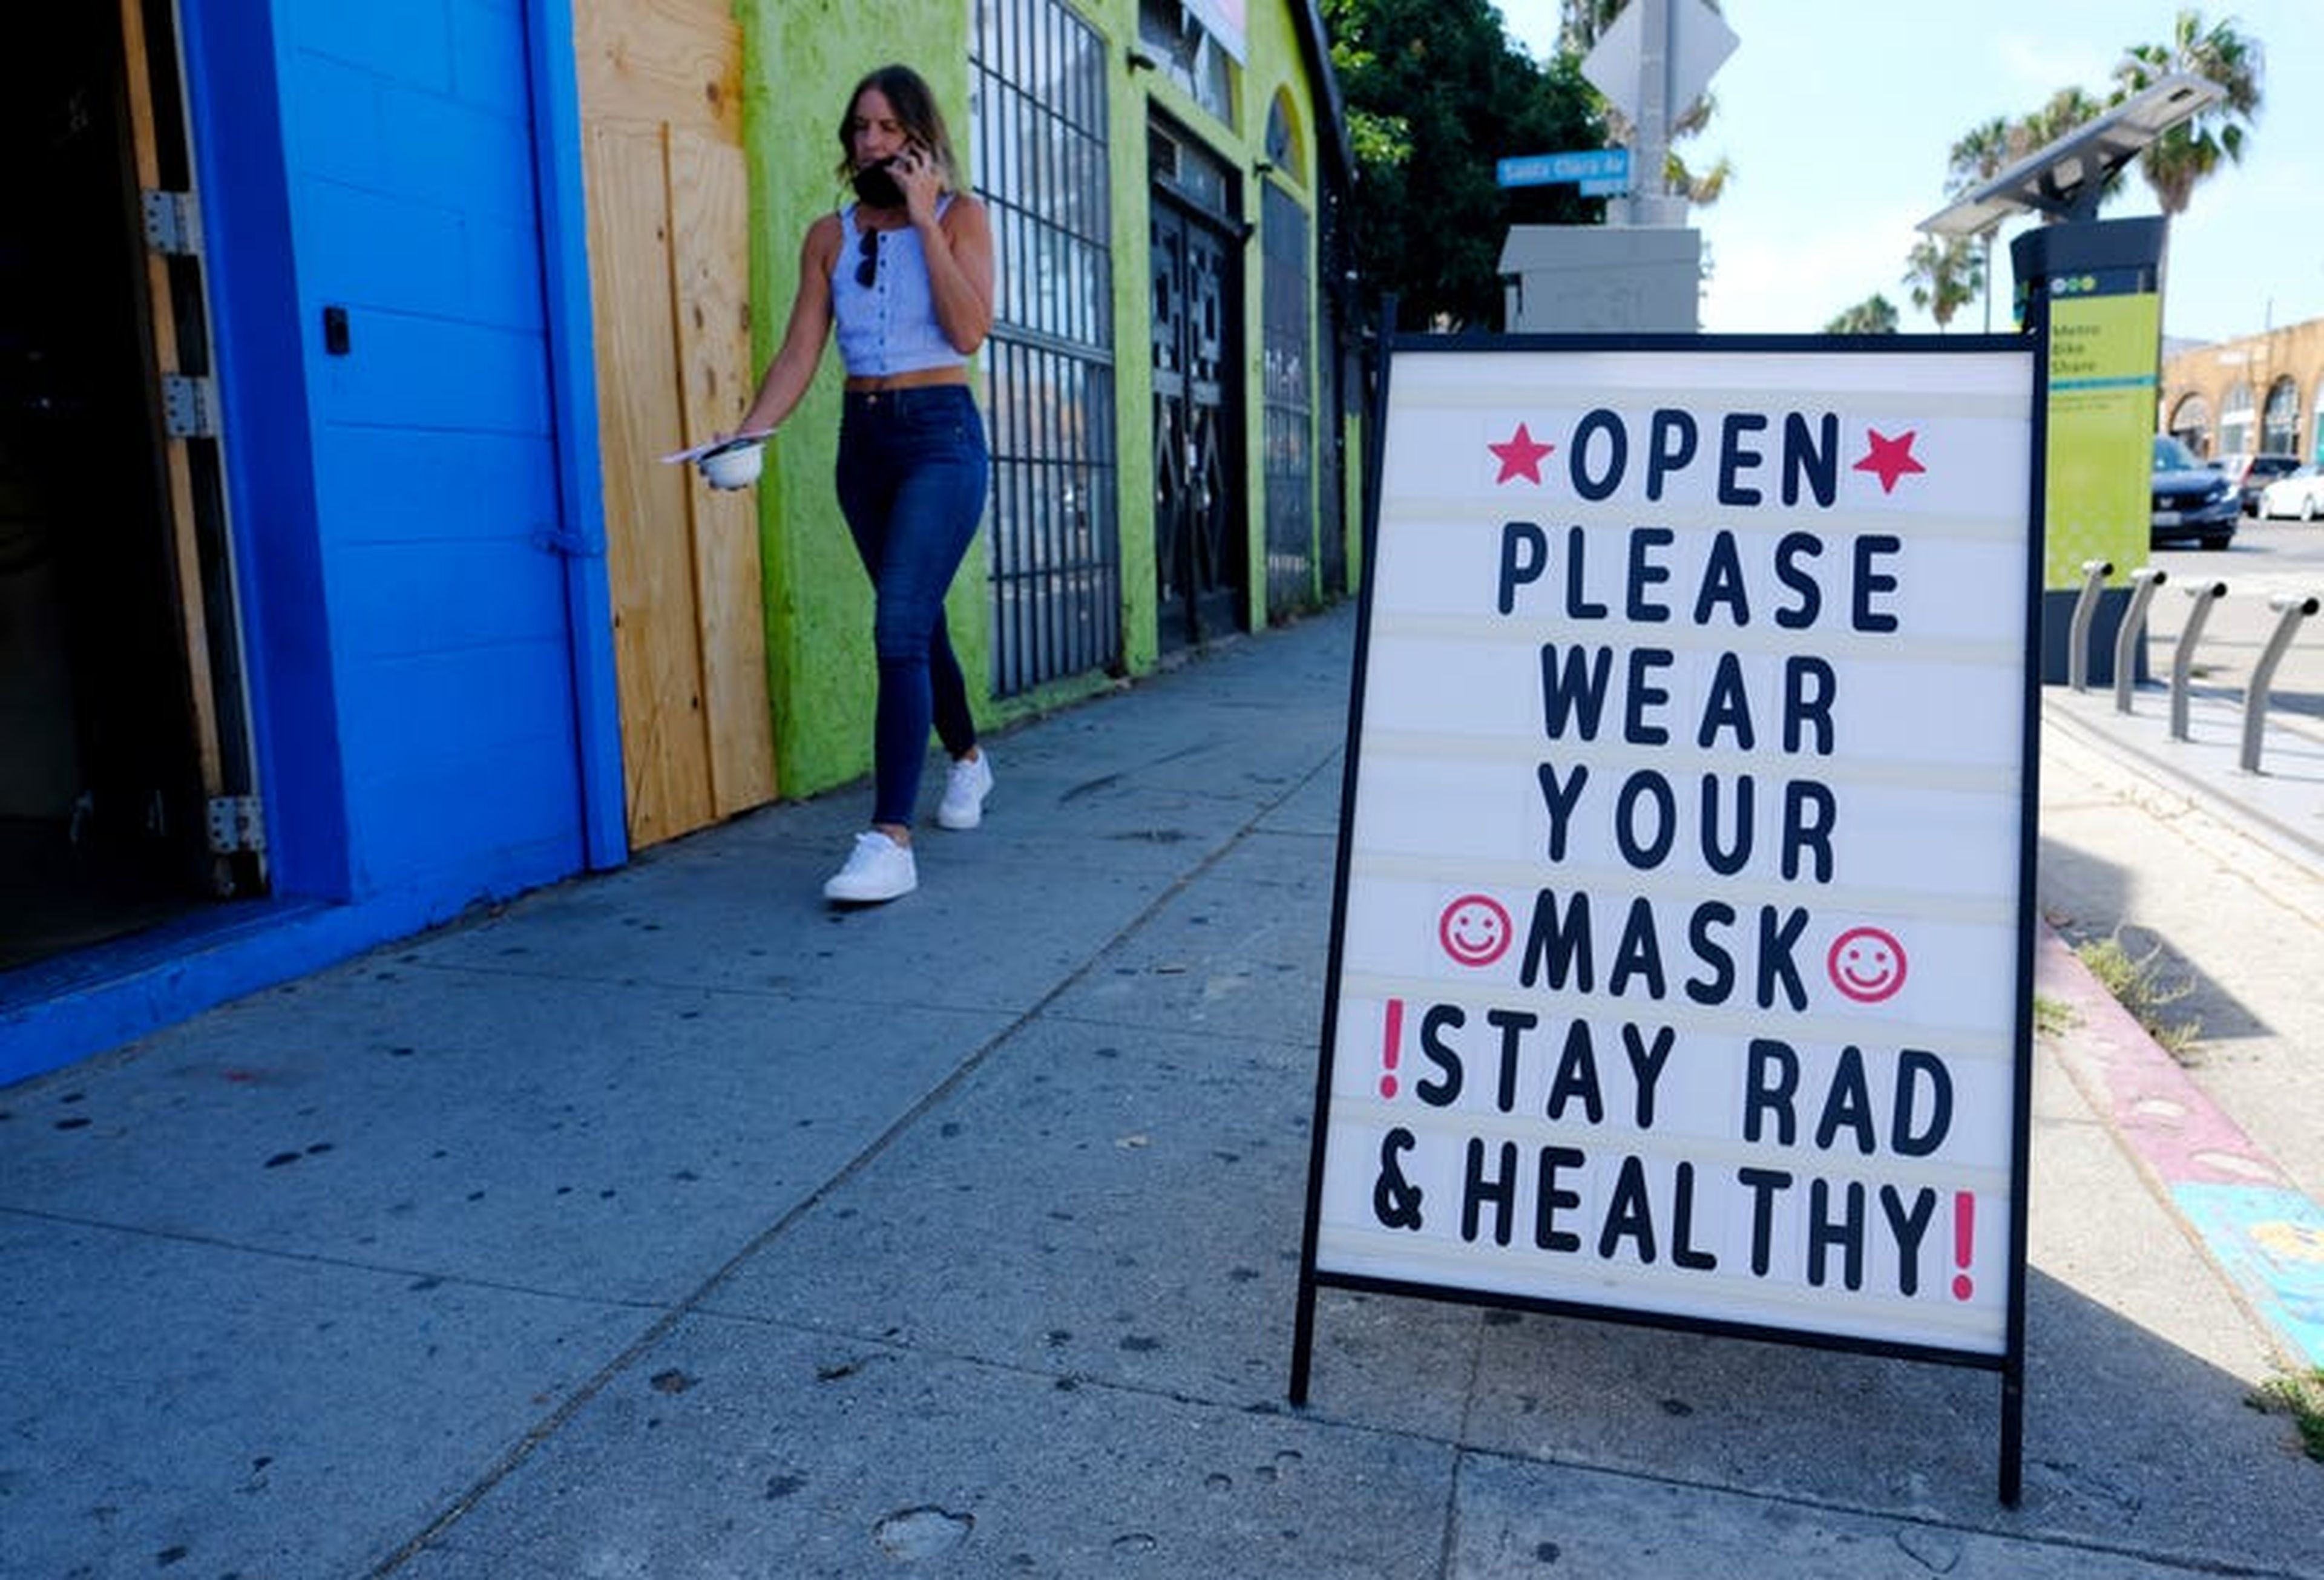 A woman walks past a recently reopened shop on Abbot Kinney Boulevard on August 26, 2020, in Venice, California.